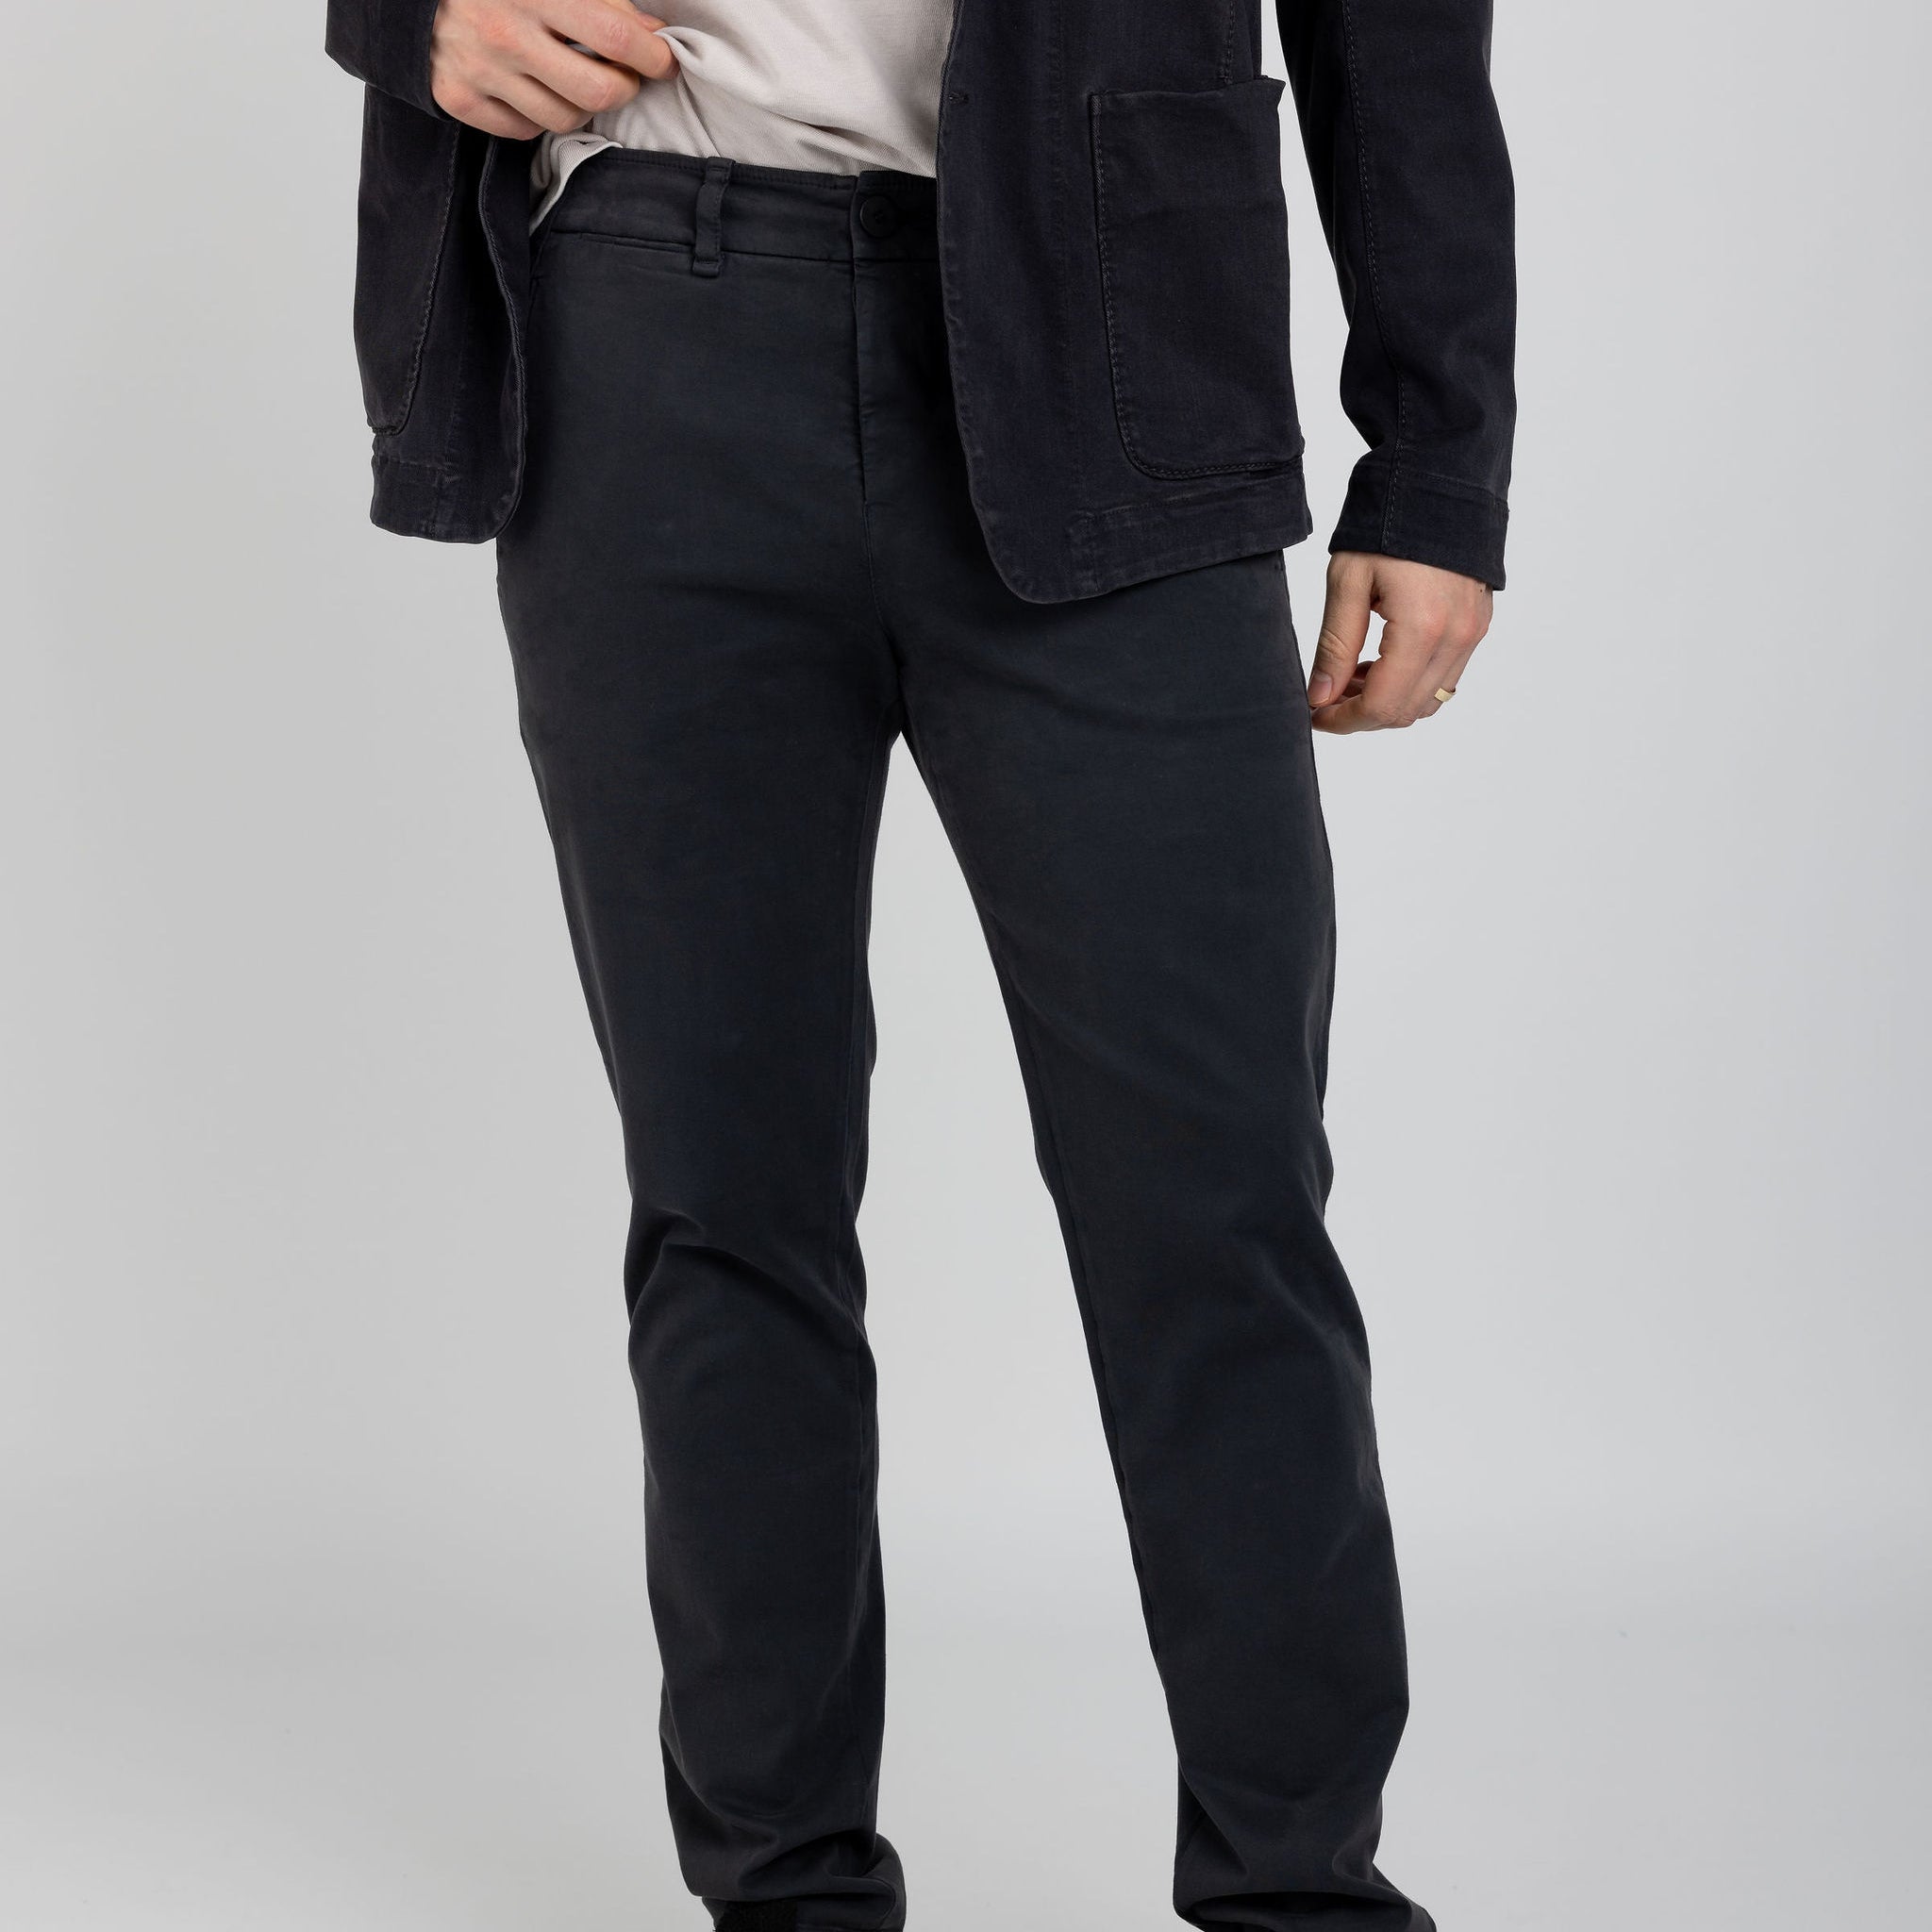 TRANSIT Trouser Pant in Charcoal